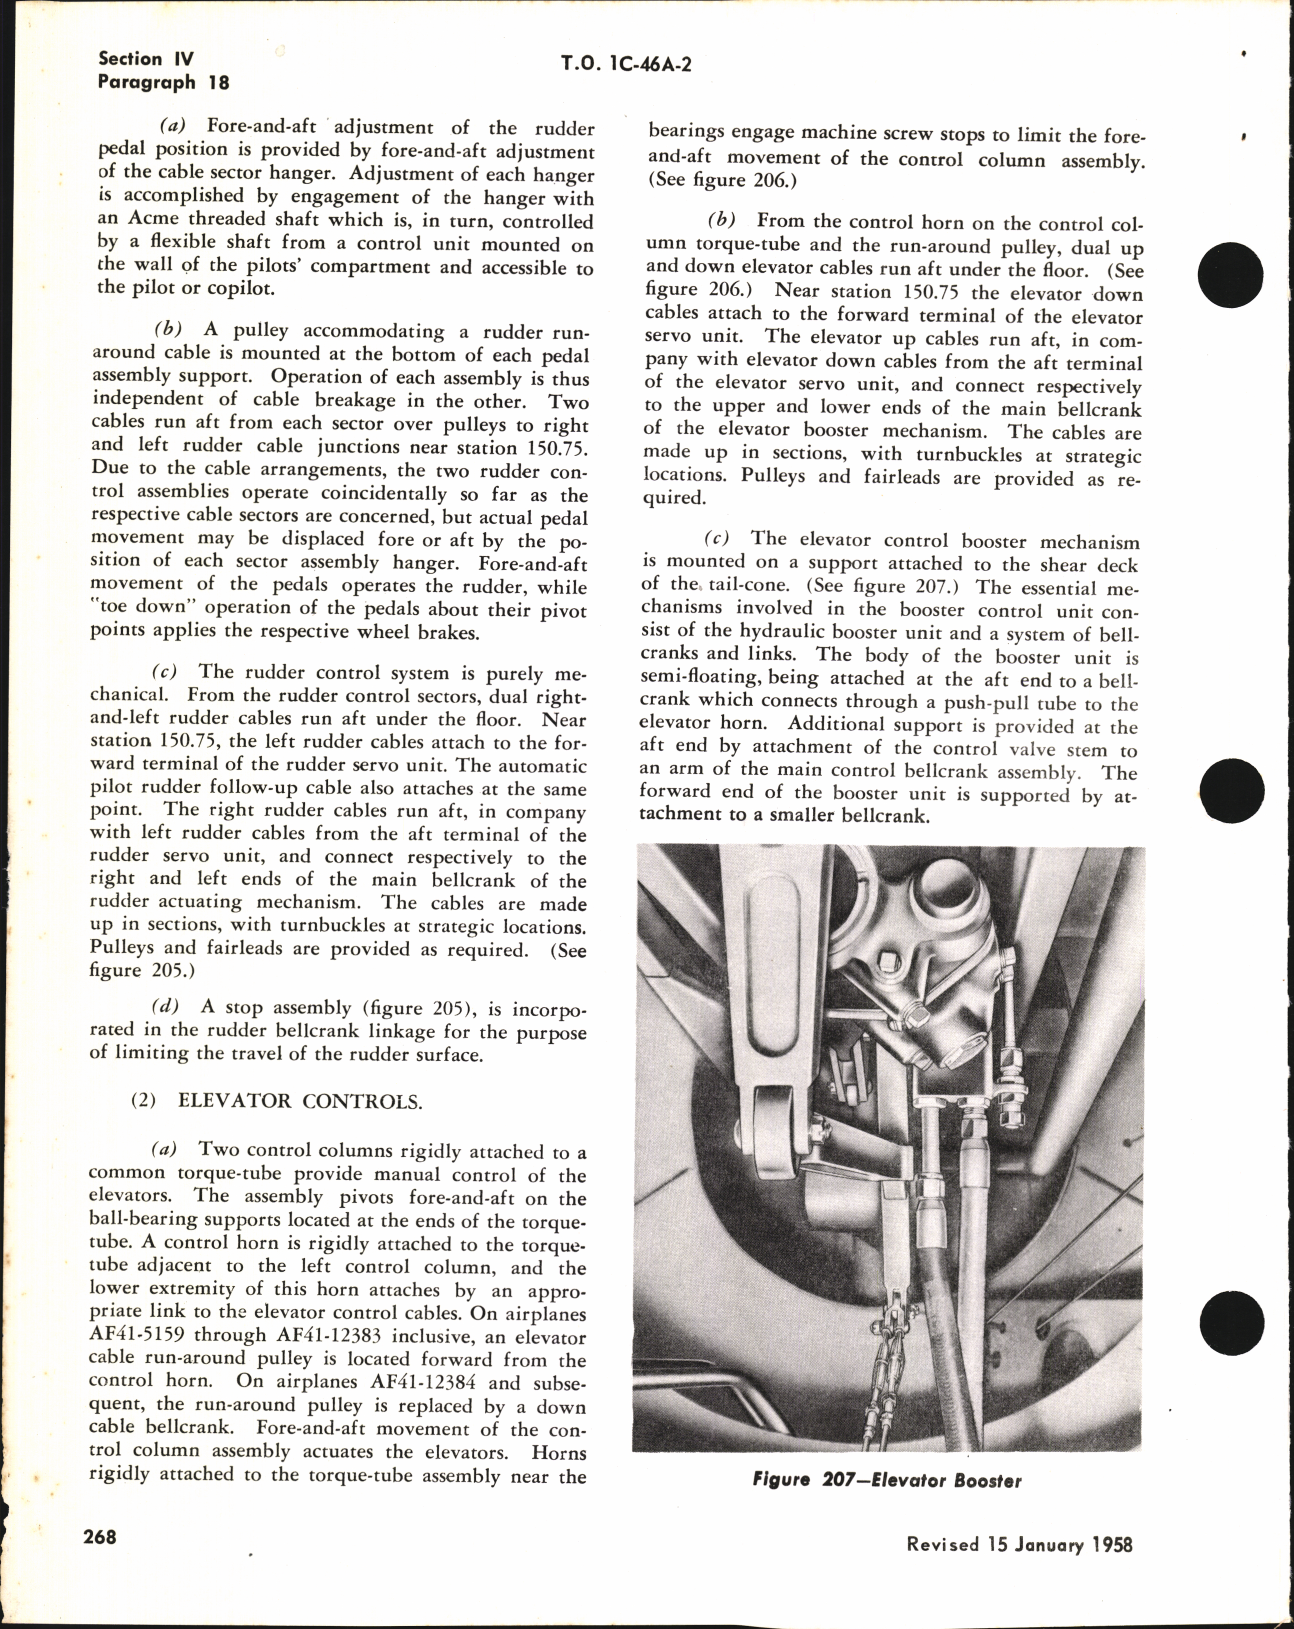 Sample page 8 from AirCorps Library document: Maintenance Instructions for C-46, ZC-46A, C-46D, C-46F, and R5C-1